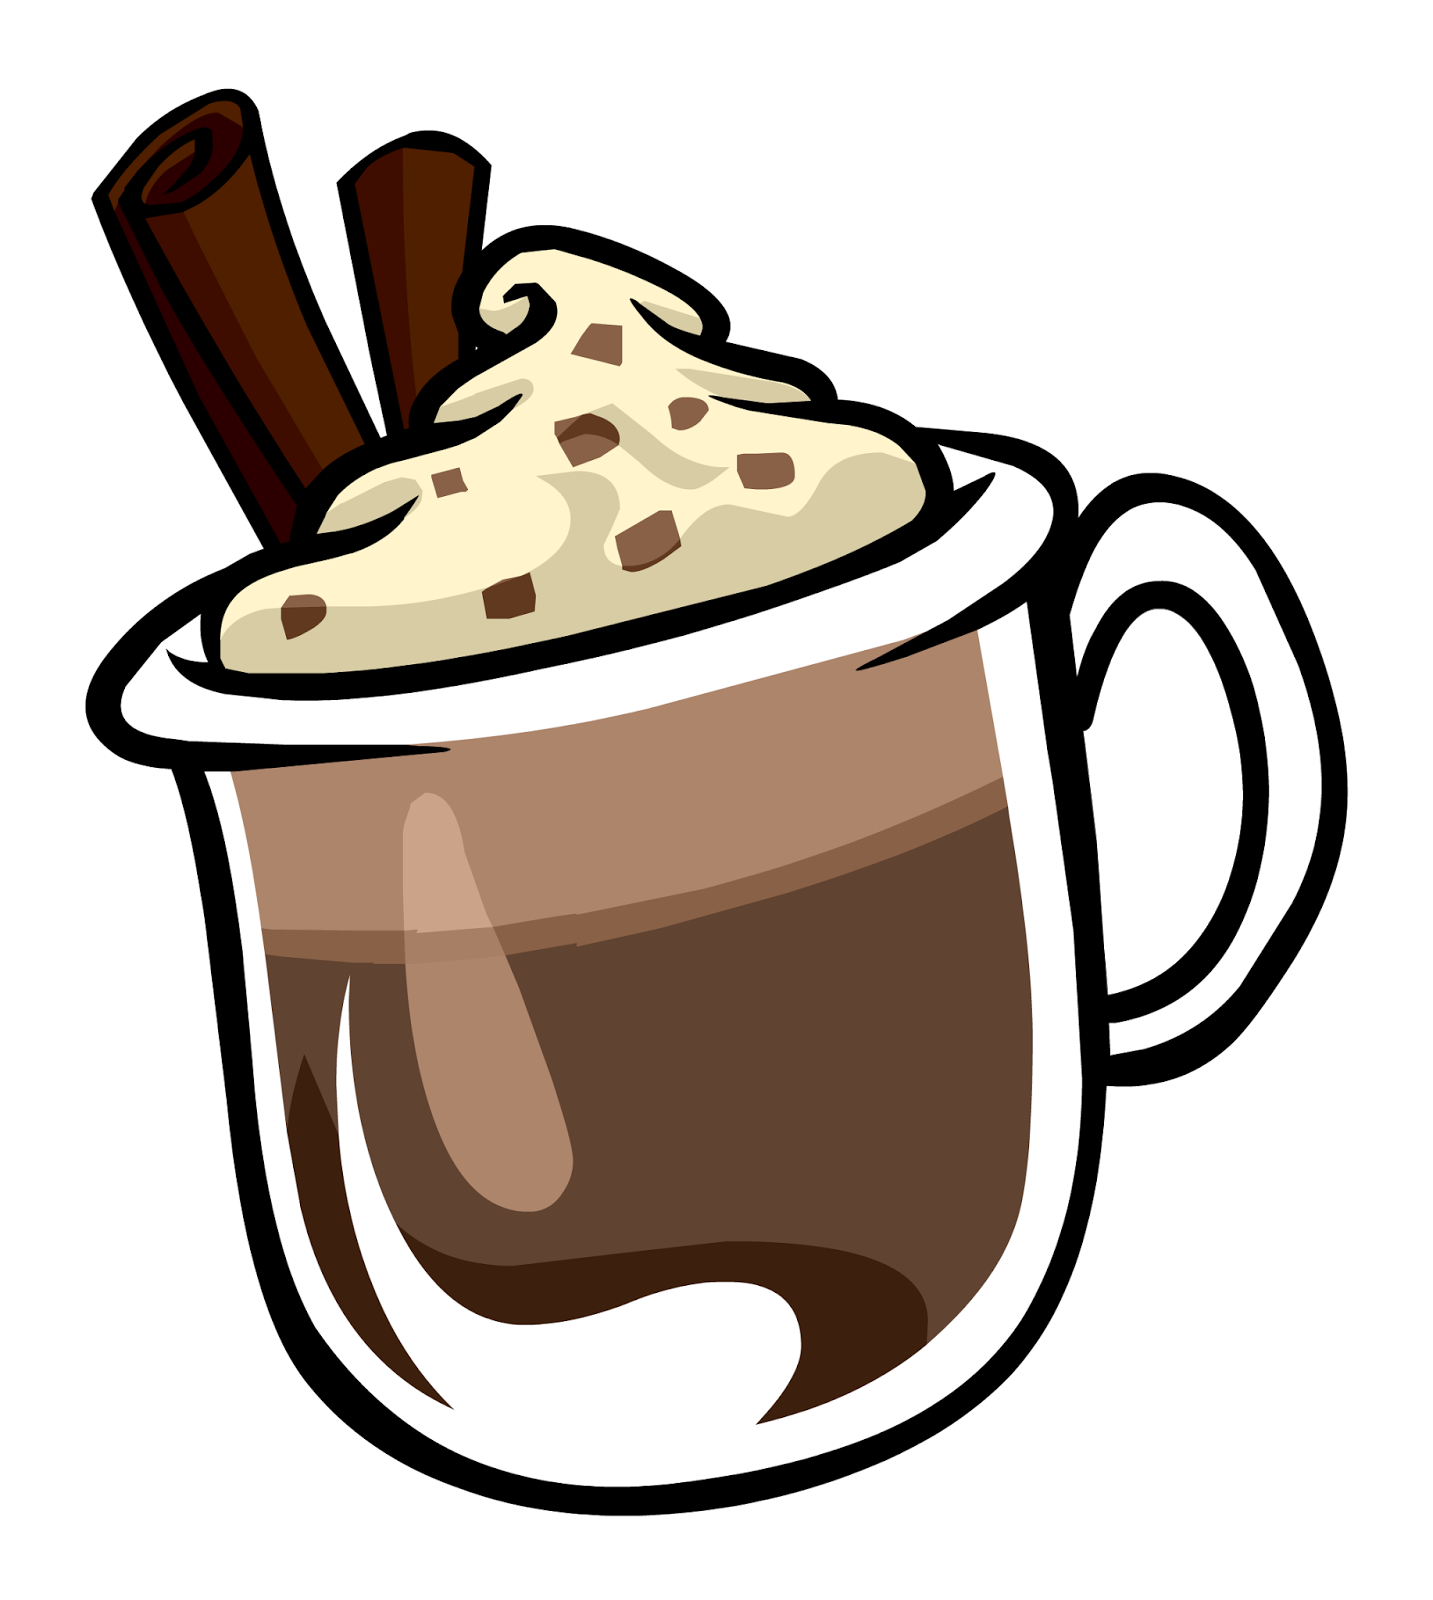 Drinking hot chocolate clipart collection png - Clipartix